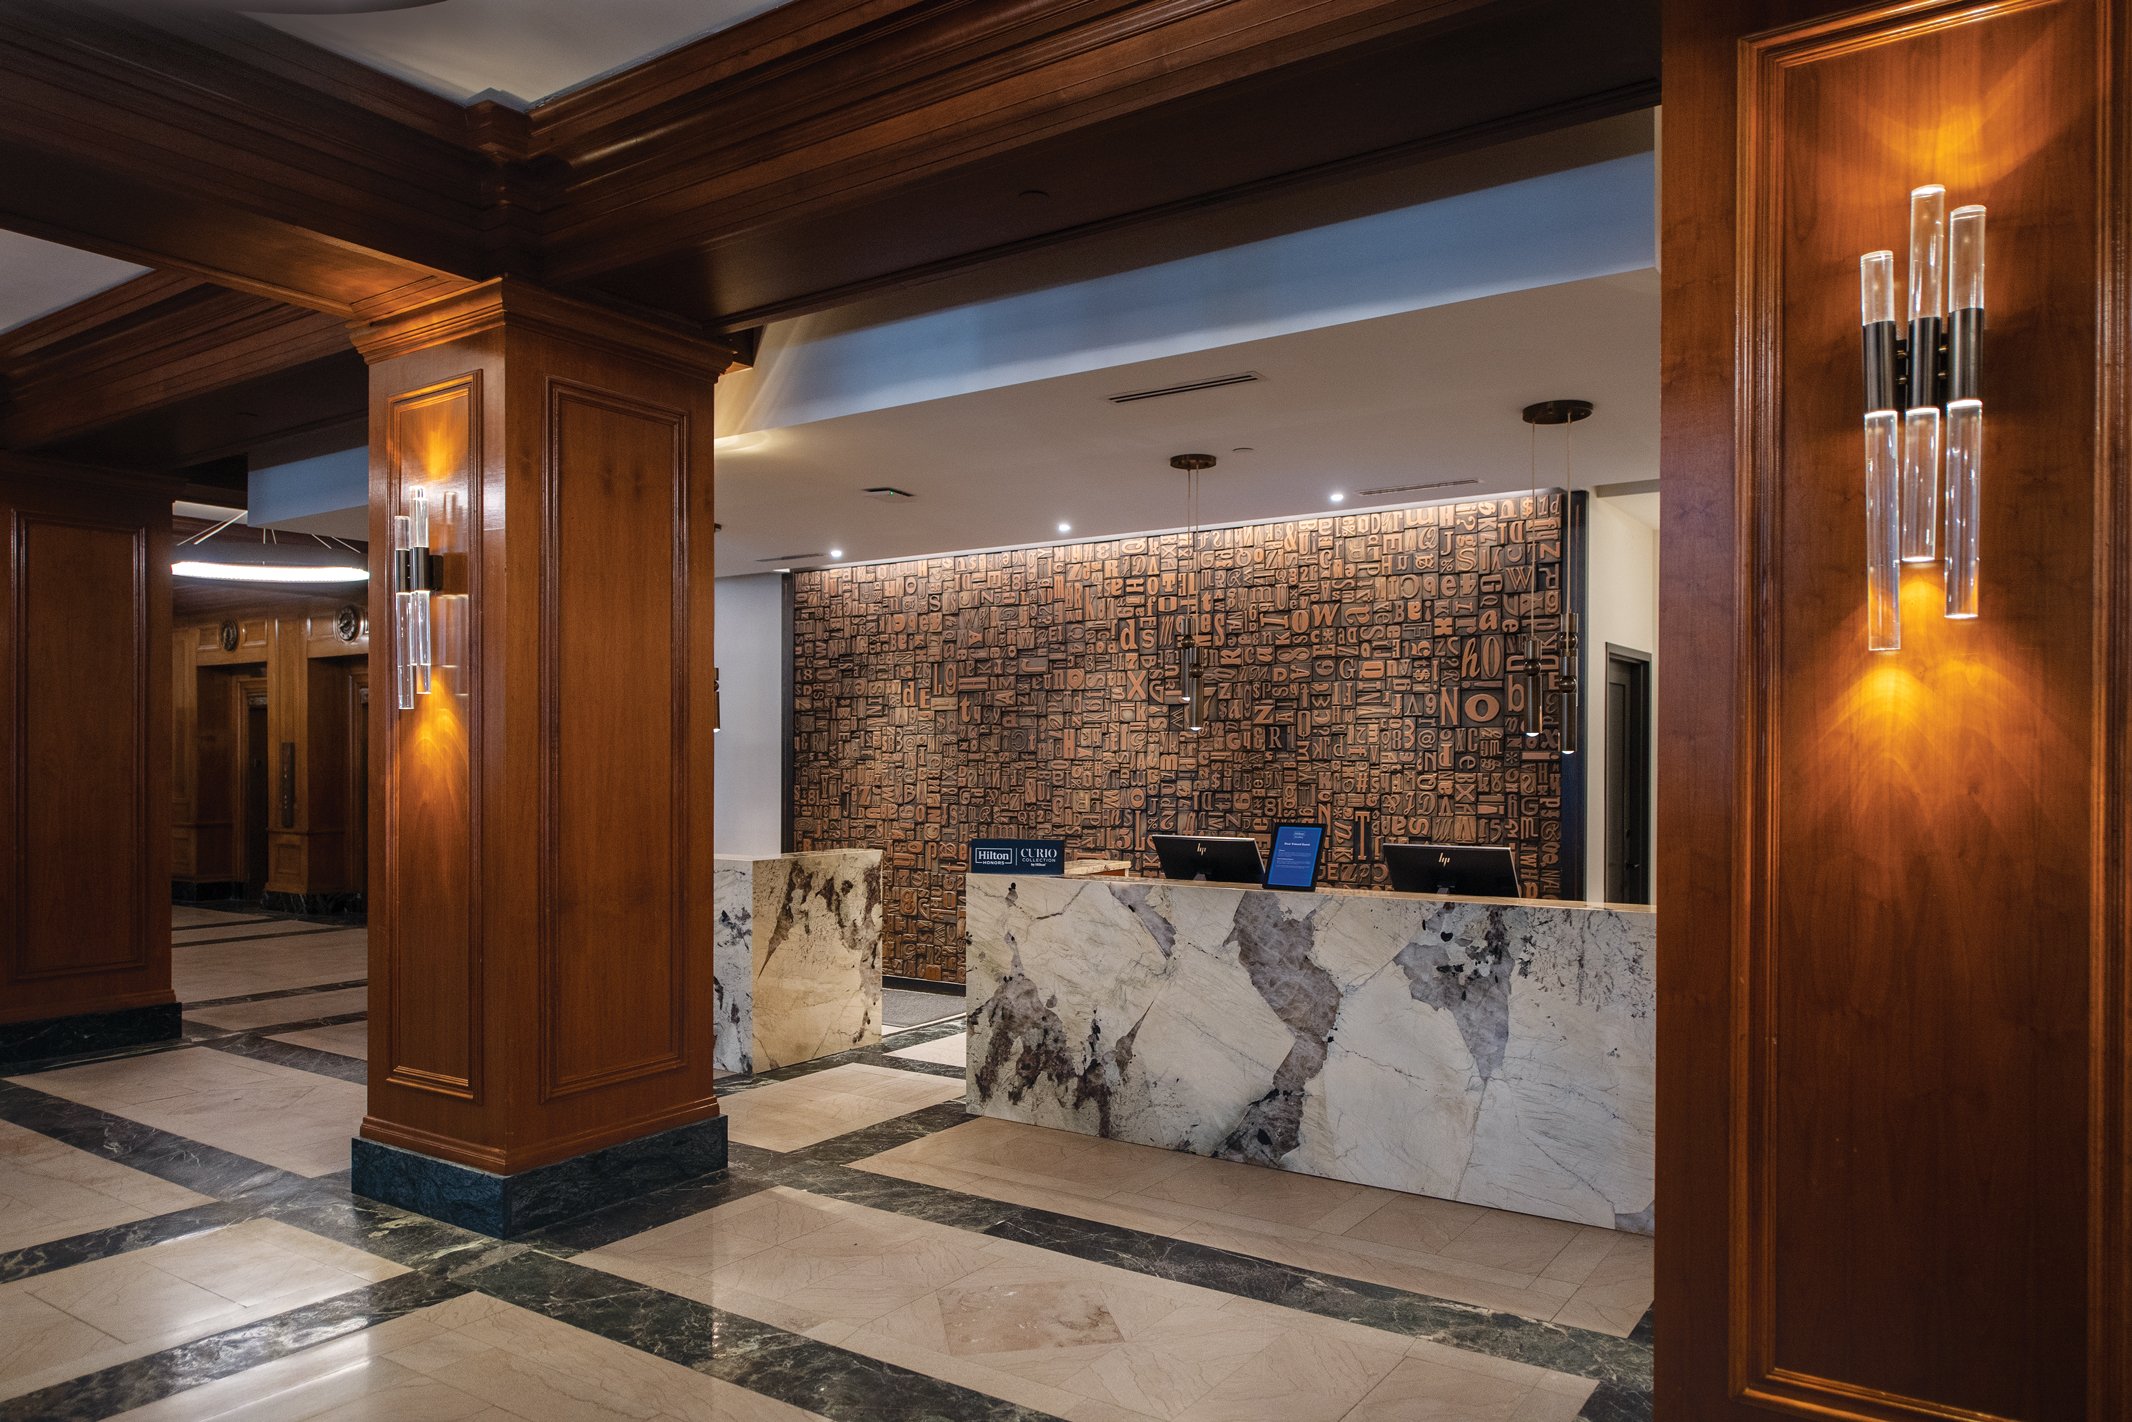  As part of the renovation, the front desk was moved back to its original location after it had been moved some time ago. The marble used was sourced from the same quarry that the original front desk was sourced from. 